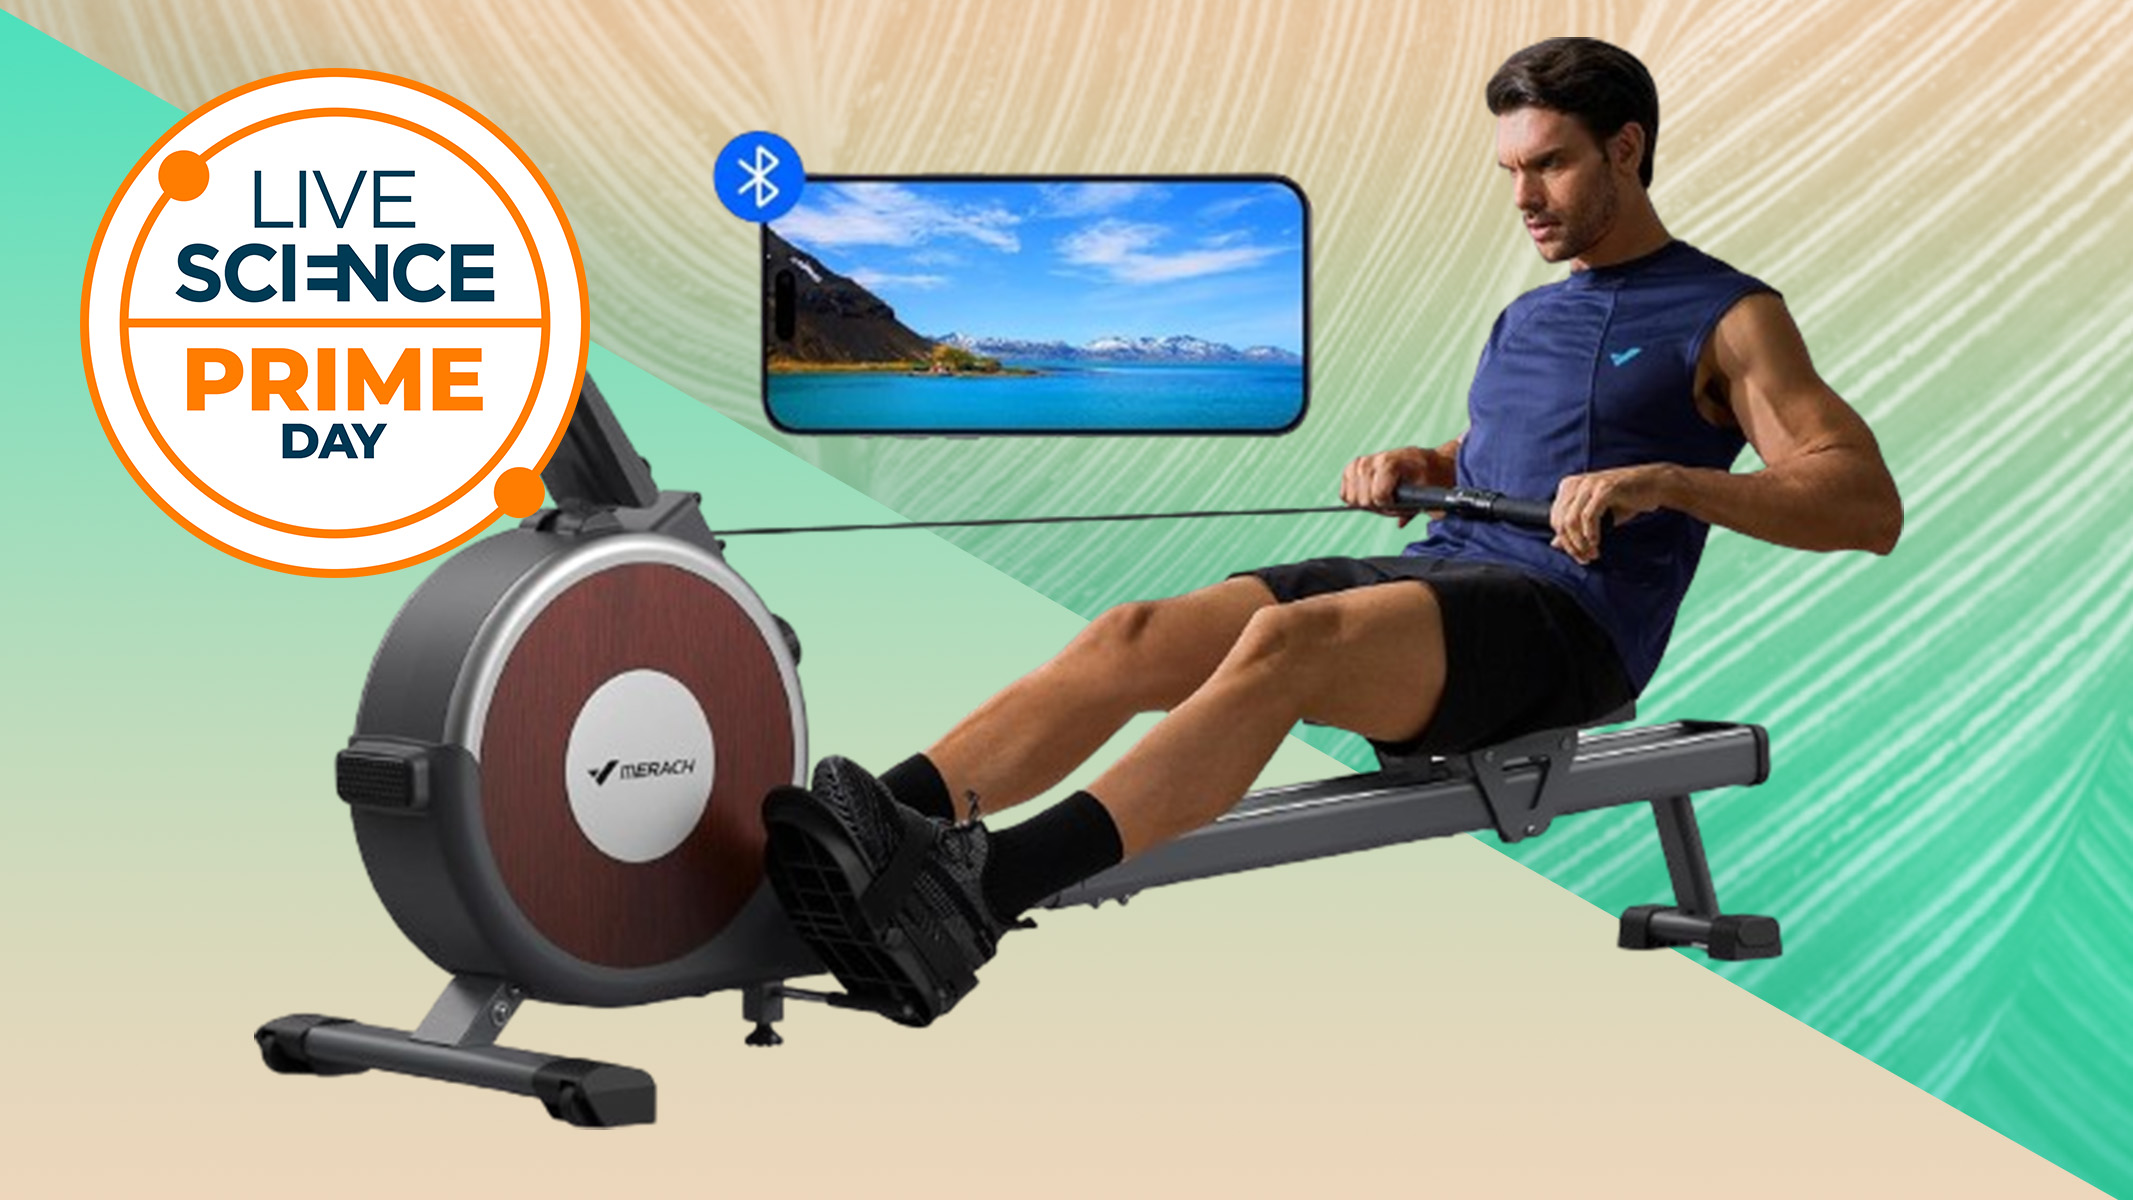  50% savings on this rowing machine Prime Day deal: Under $200 at Amazon 